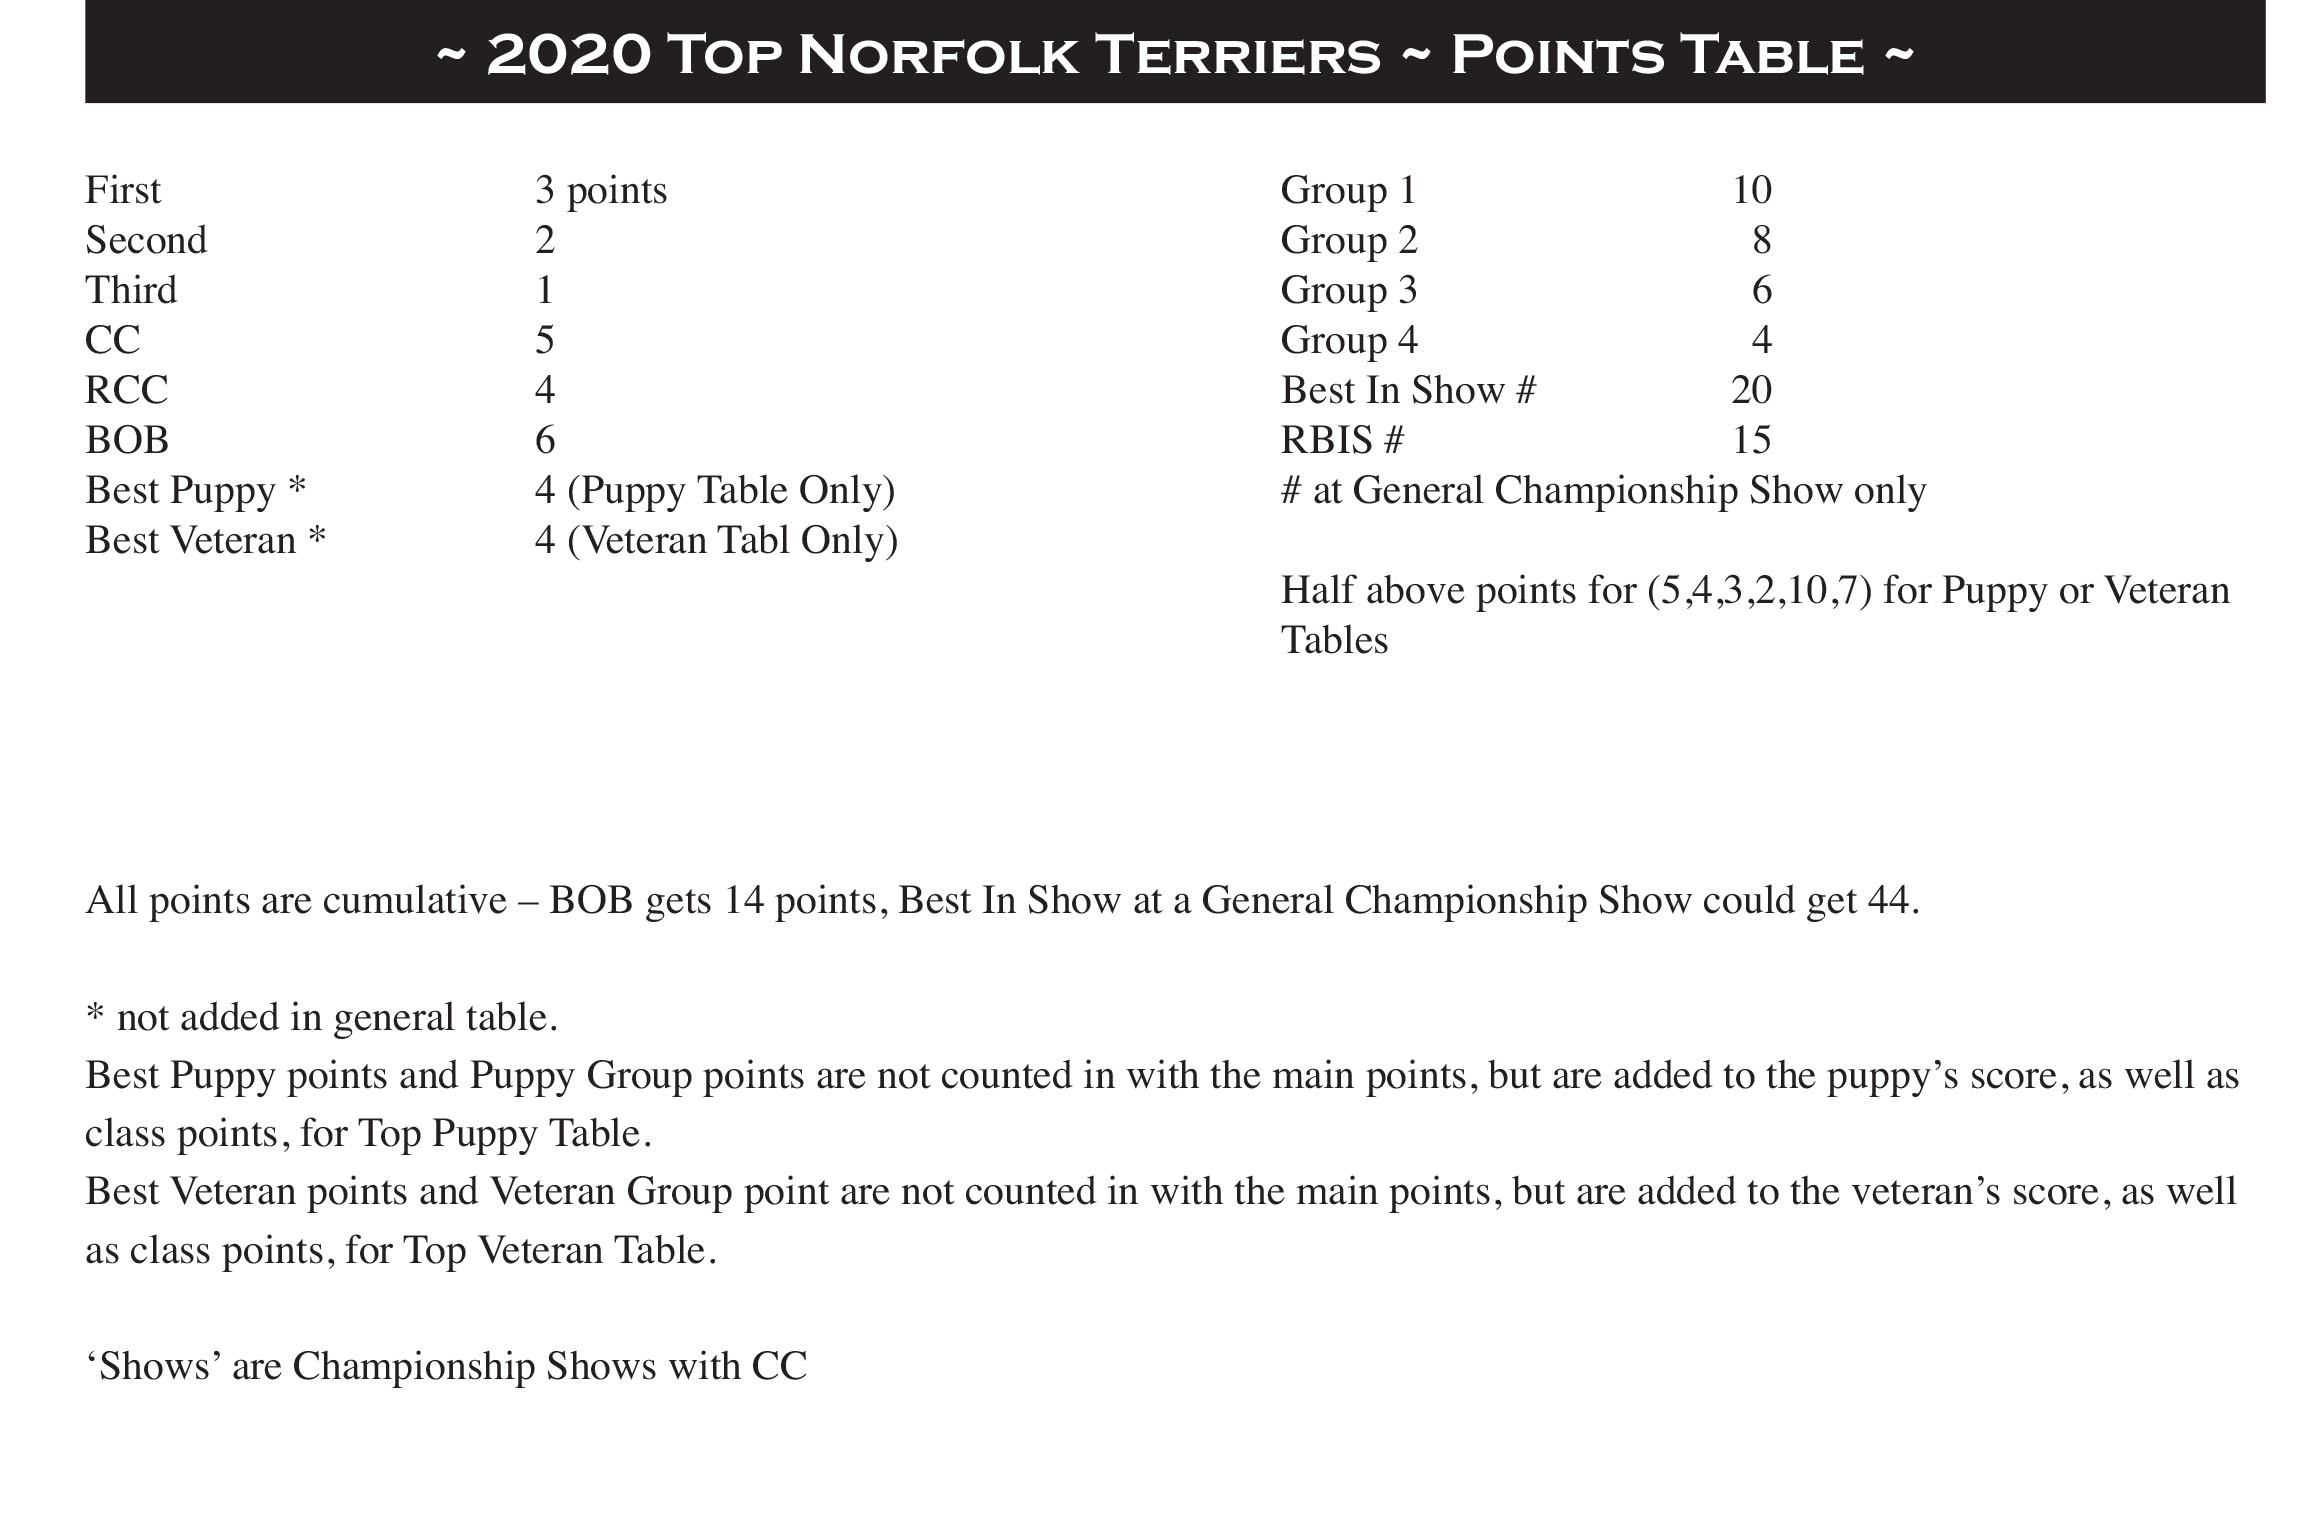 Top Norfolk Tables 2020 points table